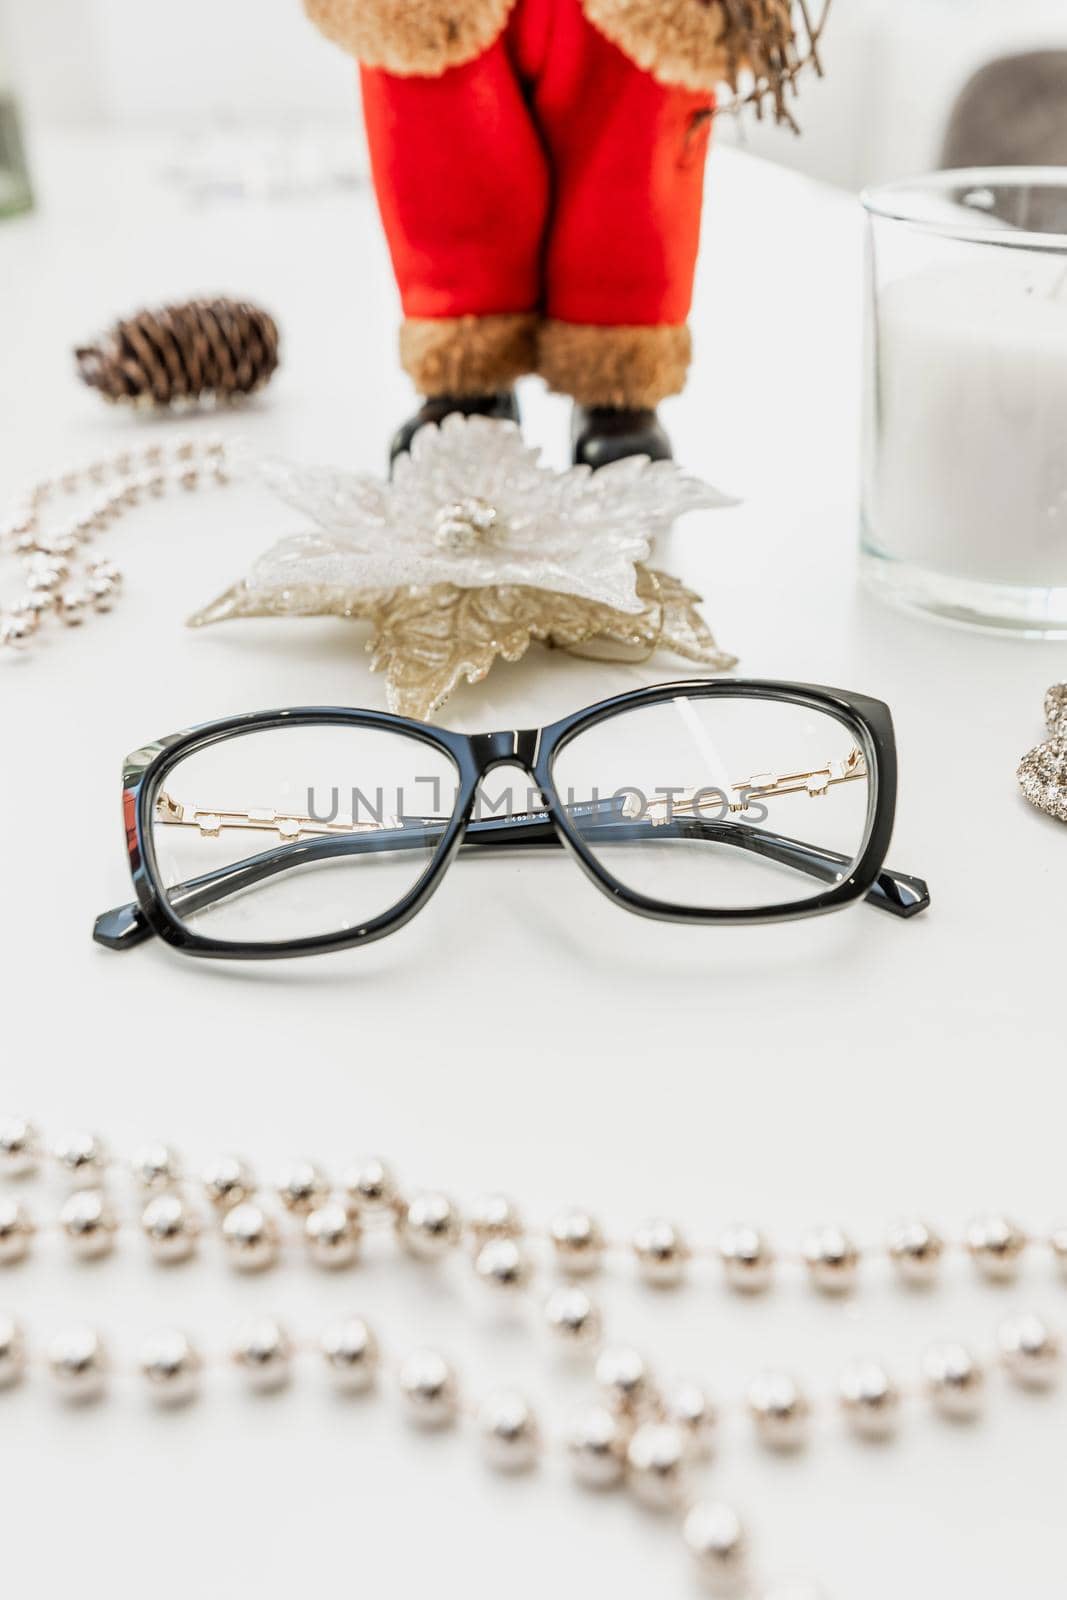 Glasses on a white table surrounded by beads by wip3out